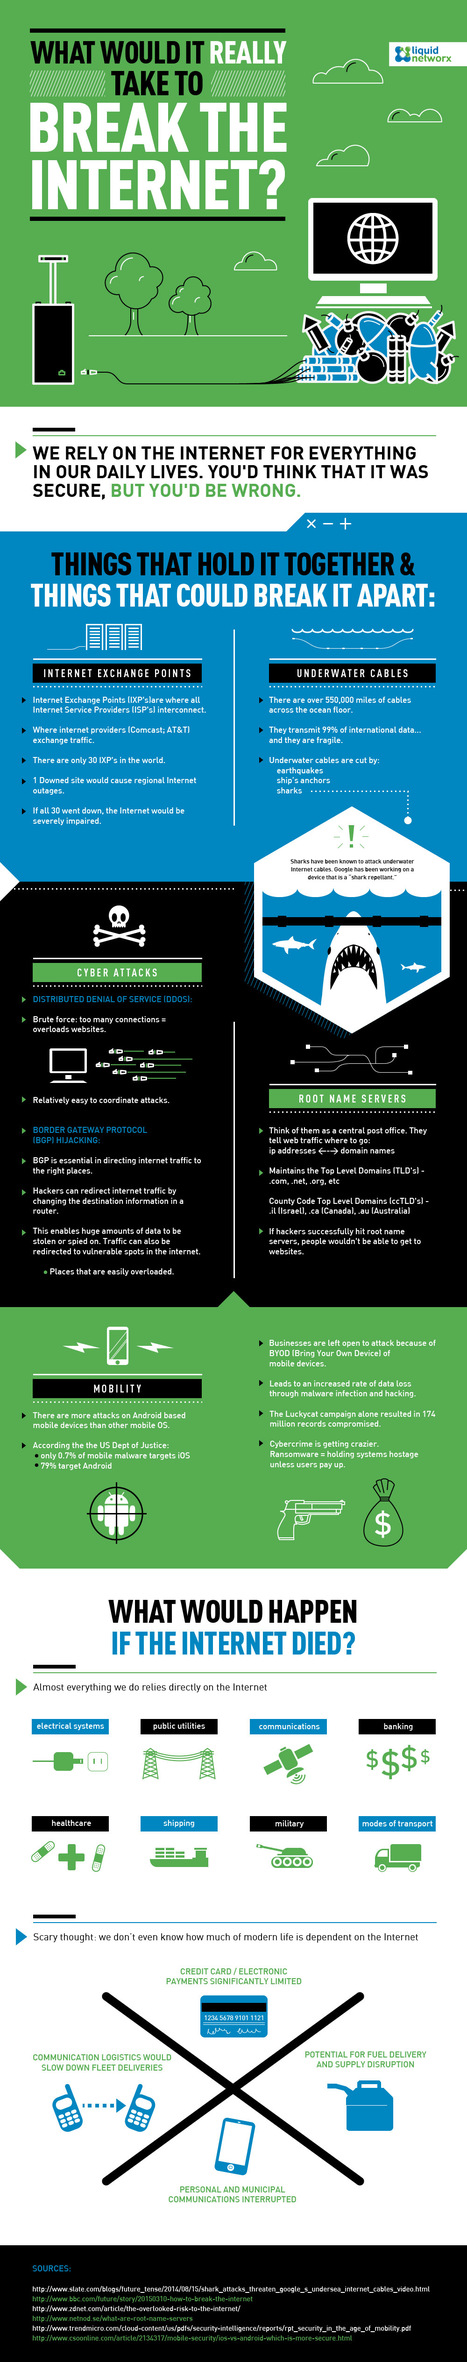 Why a Worldwide Internet Outage Isn't That Far-Fetched | Infographic | 21st Century Learning and Teaching | Scoop.it